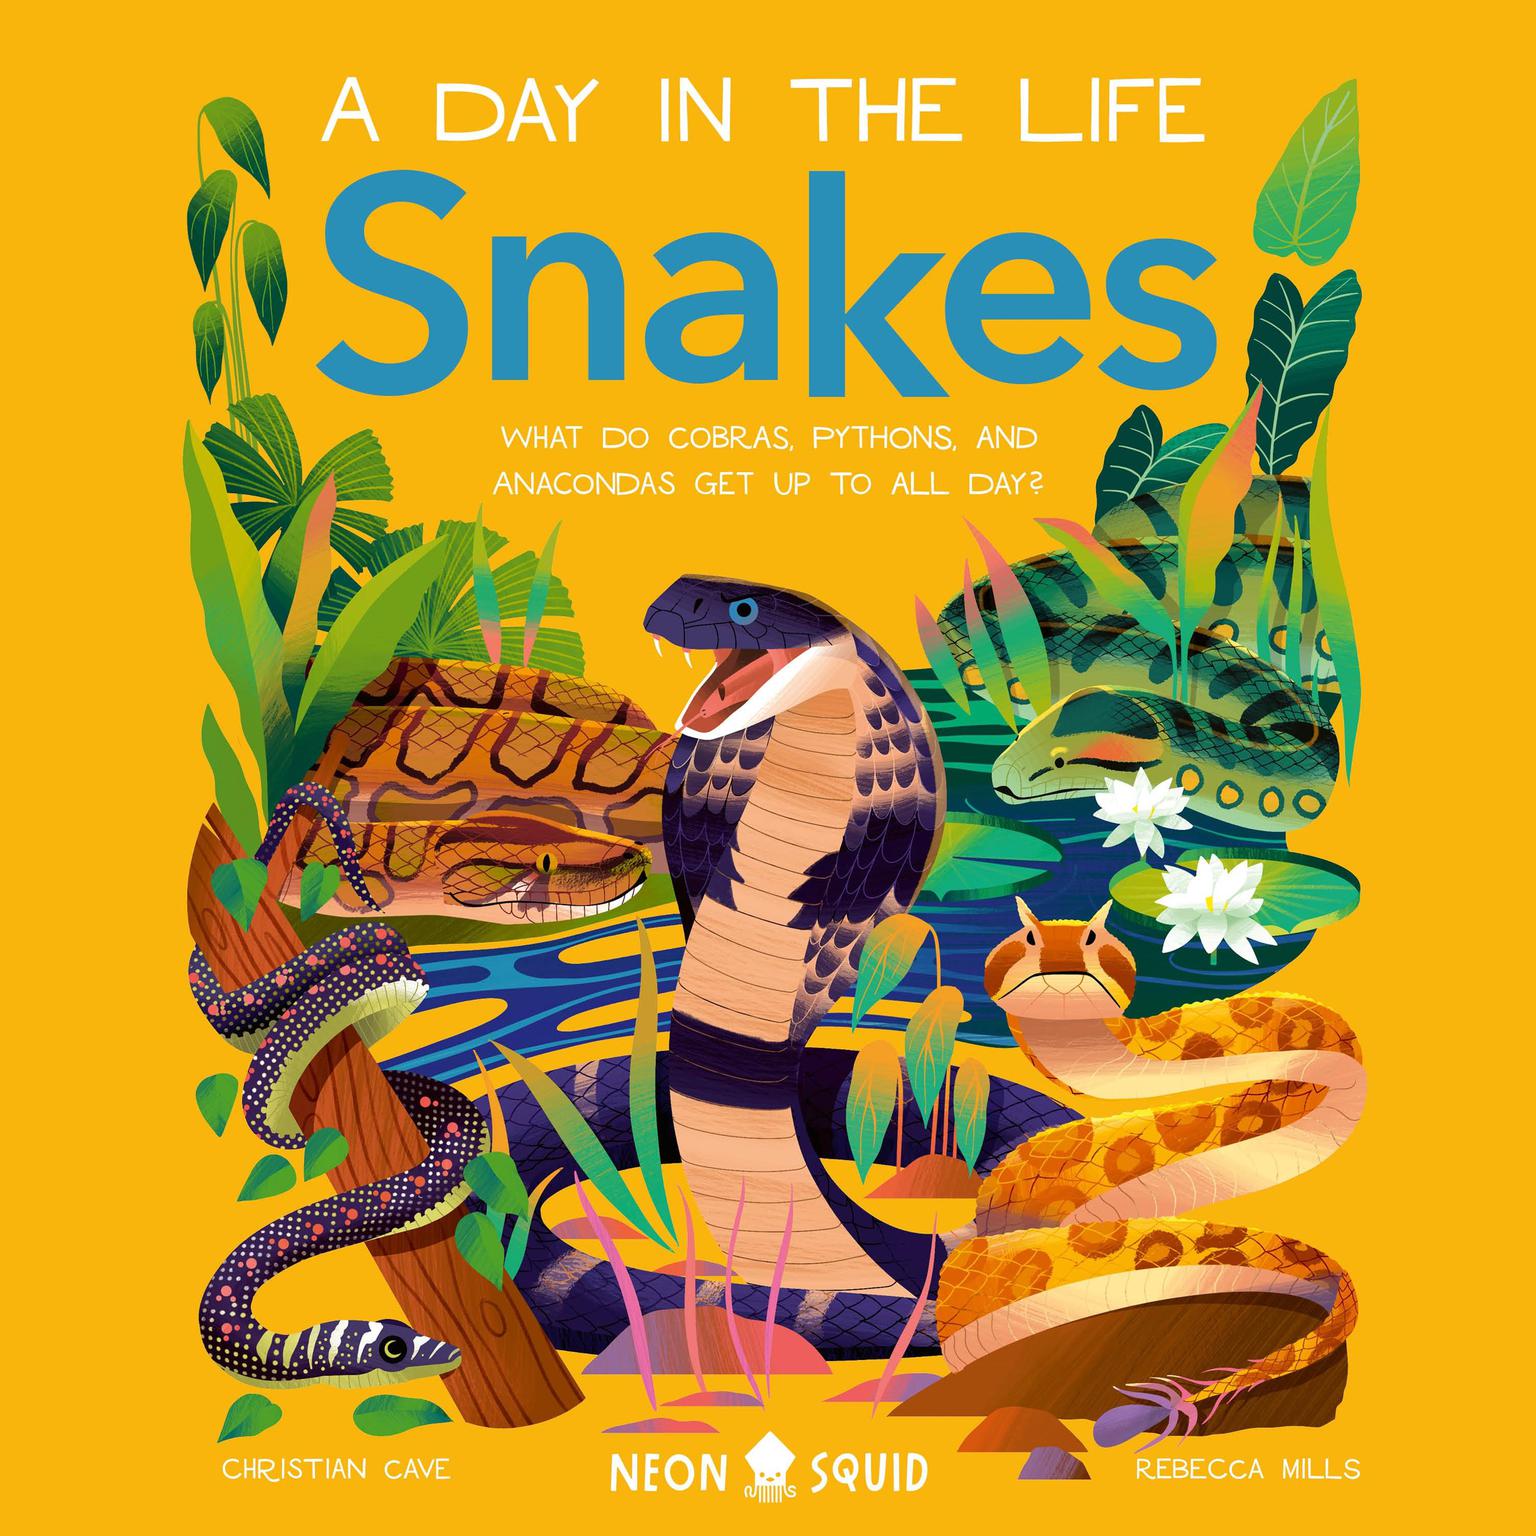 Snakes (A Day in the Life): What Do Cobras, Pythons, and Anacondas Get Up to All Day? Audiobook, by Christian Cave